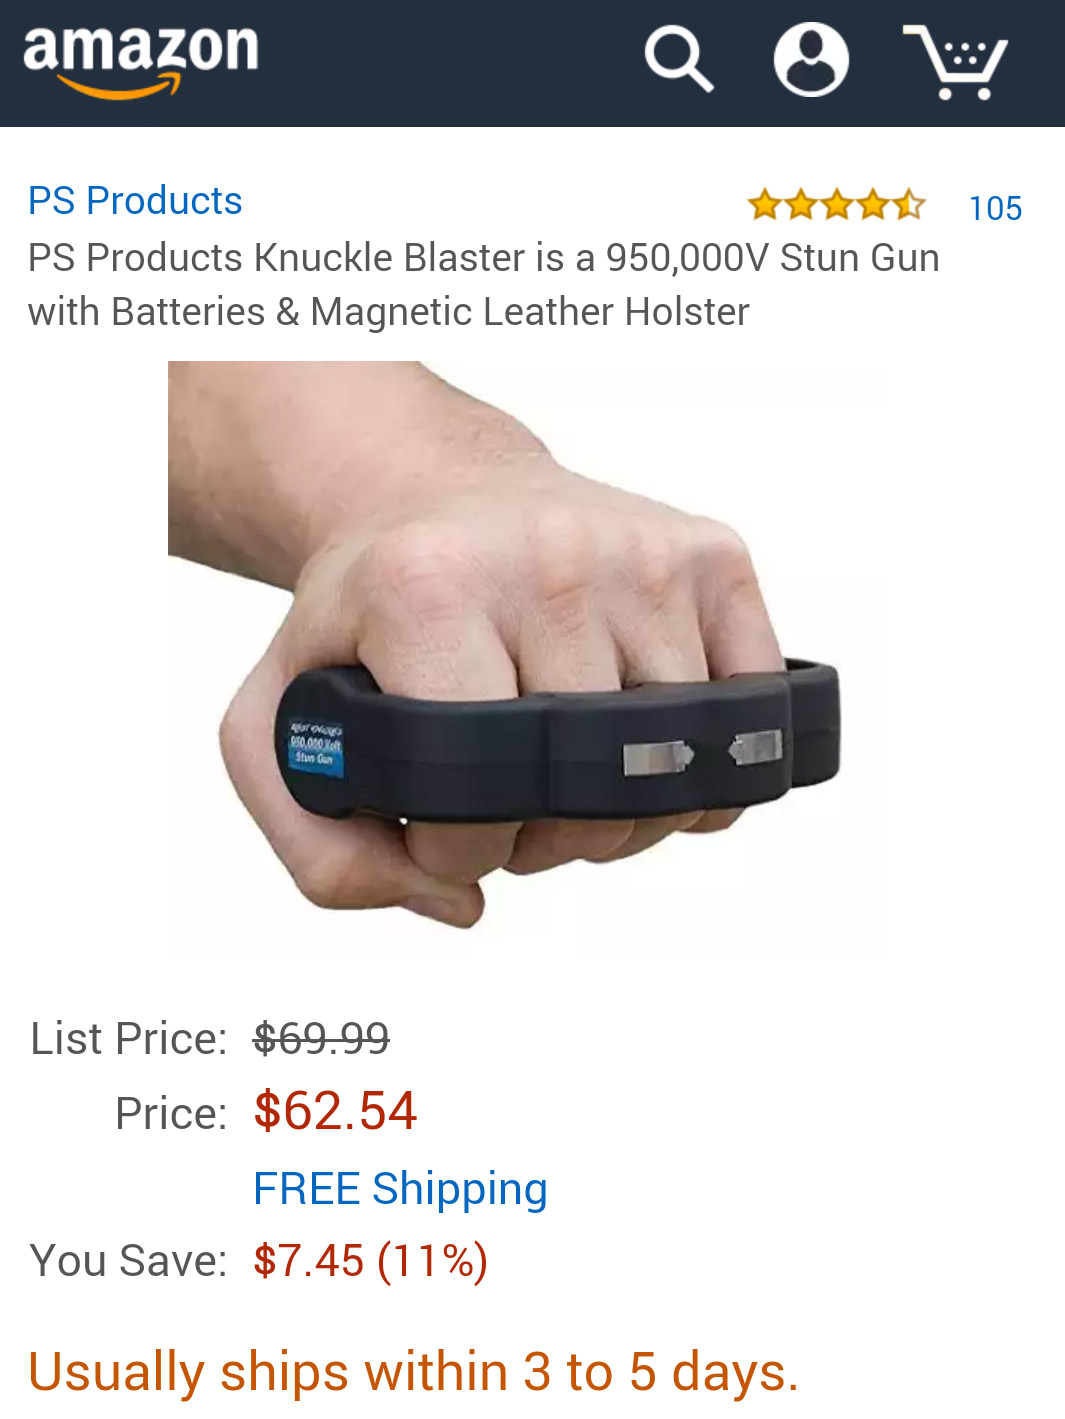 amazon reviews - amazon funny - amazon Q O W Ps Products Xxx 105 Ps Products Knuckle Blaster is a 950,000V Stun Gun with Batteries & Magnetic Leather Holster Aurora 450,000 Volt Stun Gun List Price $69.99 Price $62.54 Free Shipping You Save $7.45 11% Usua